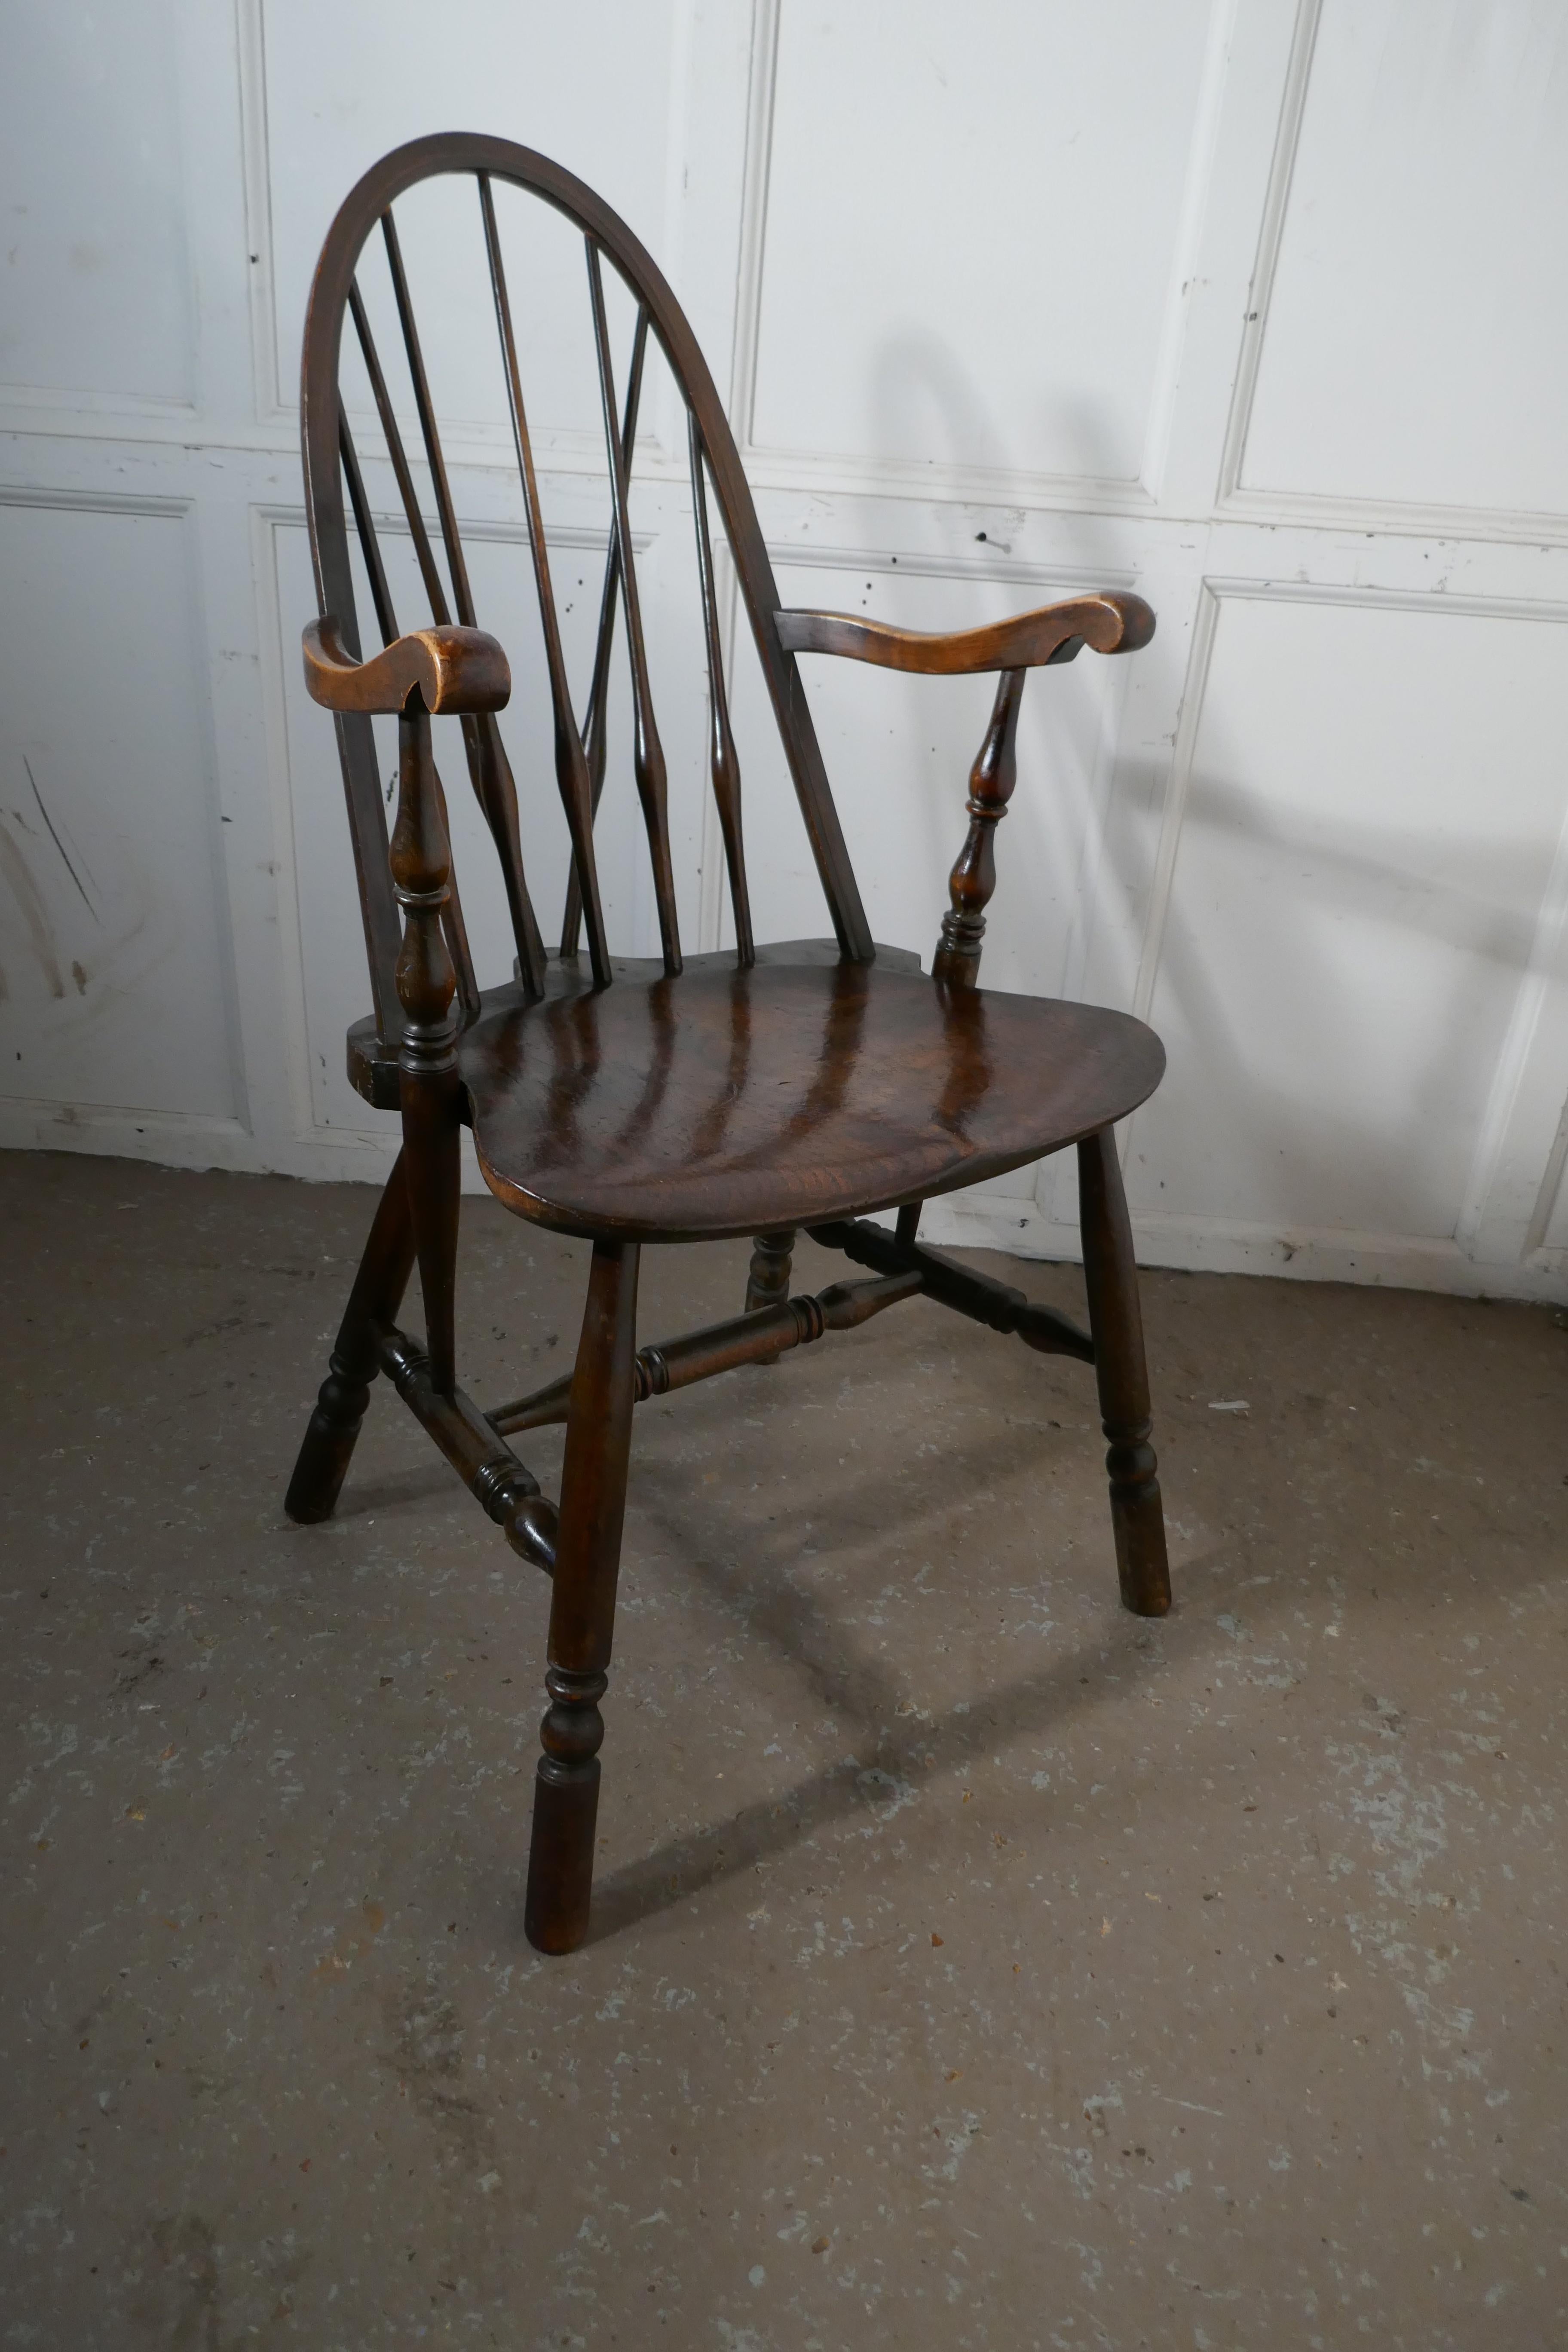 Arts & Crafts high back English Windsor carver chair, 

A superior Arts & Crafts Windsor carver chair
The chair has a superb saddle shaped solid elm seat with wedge back which adds strength to the design 
The chair has turned stretchered legs